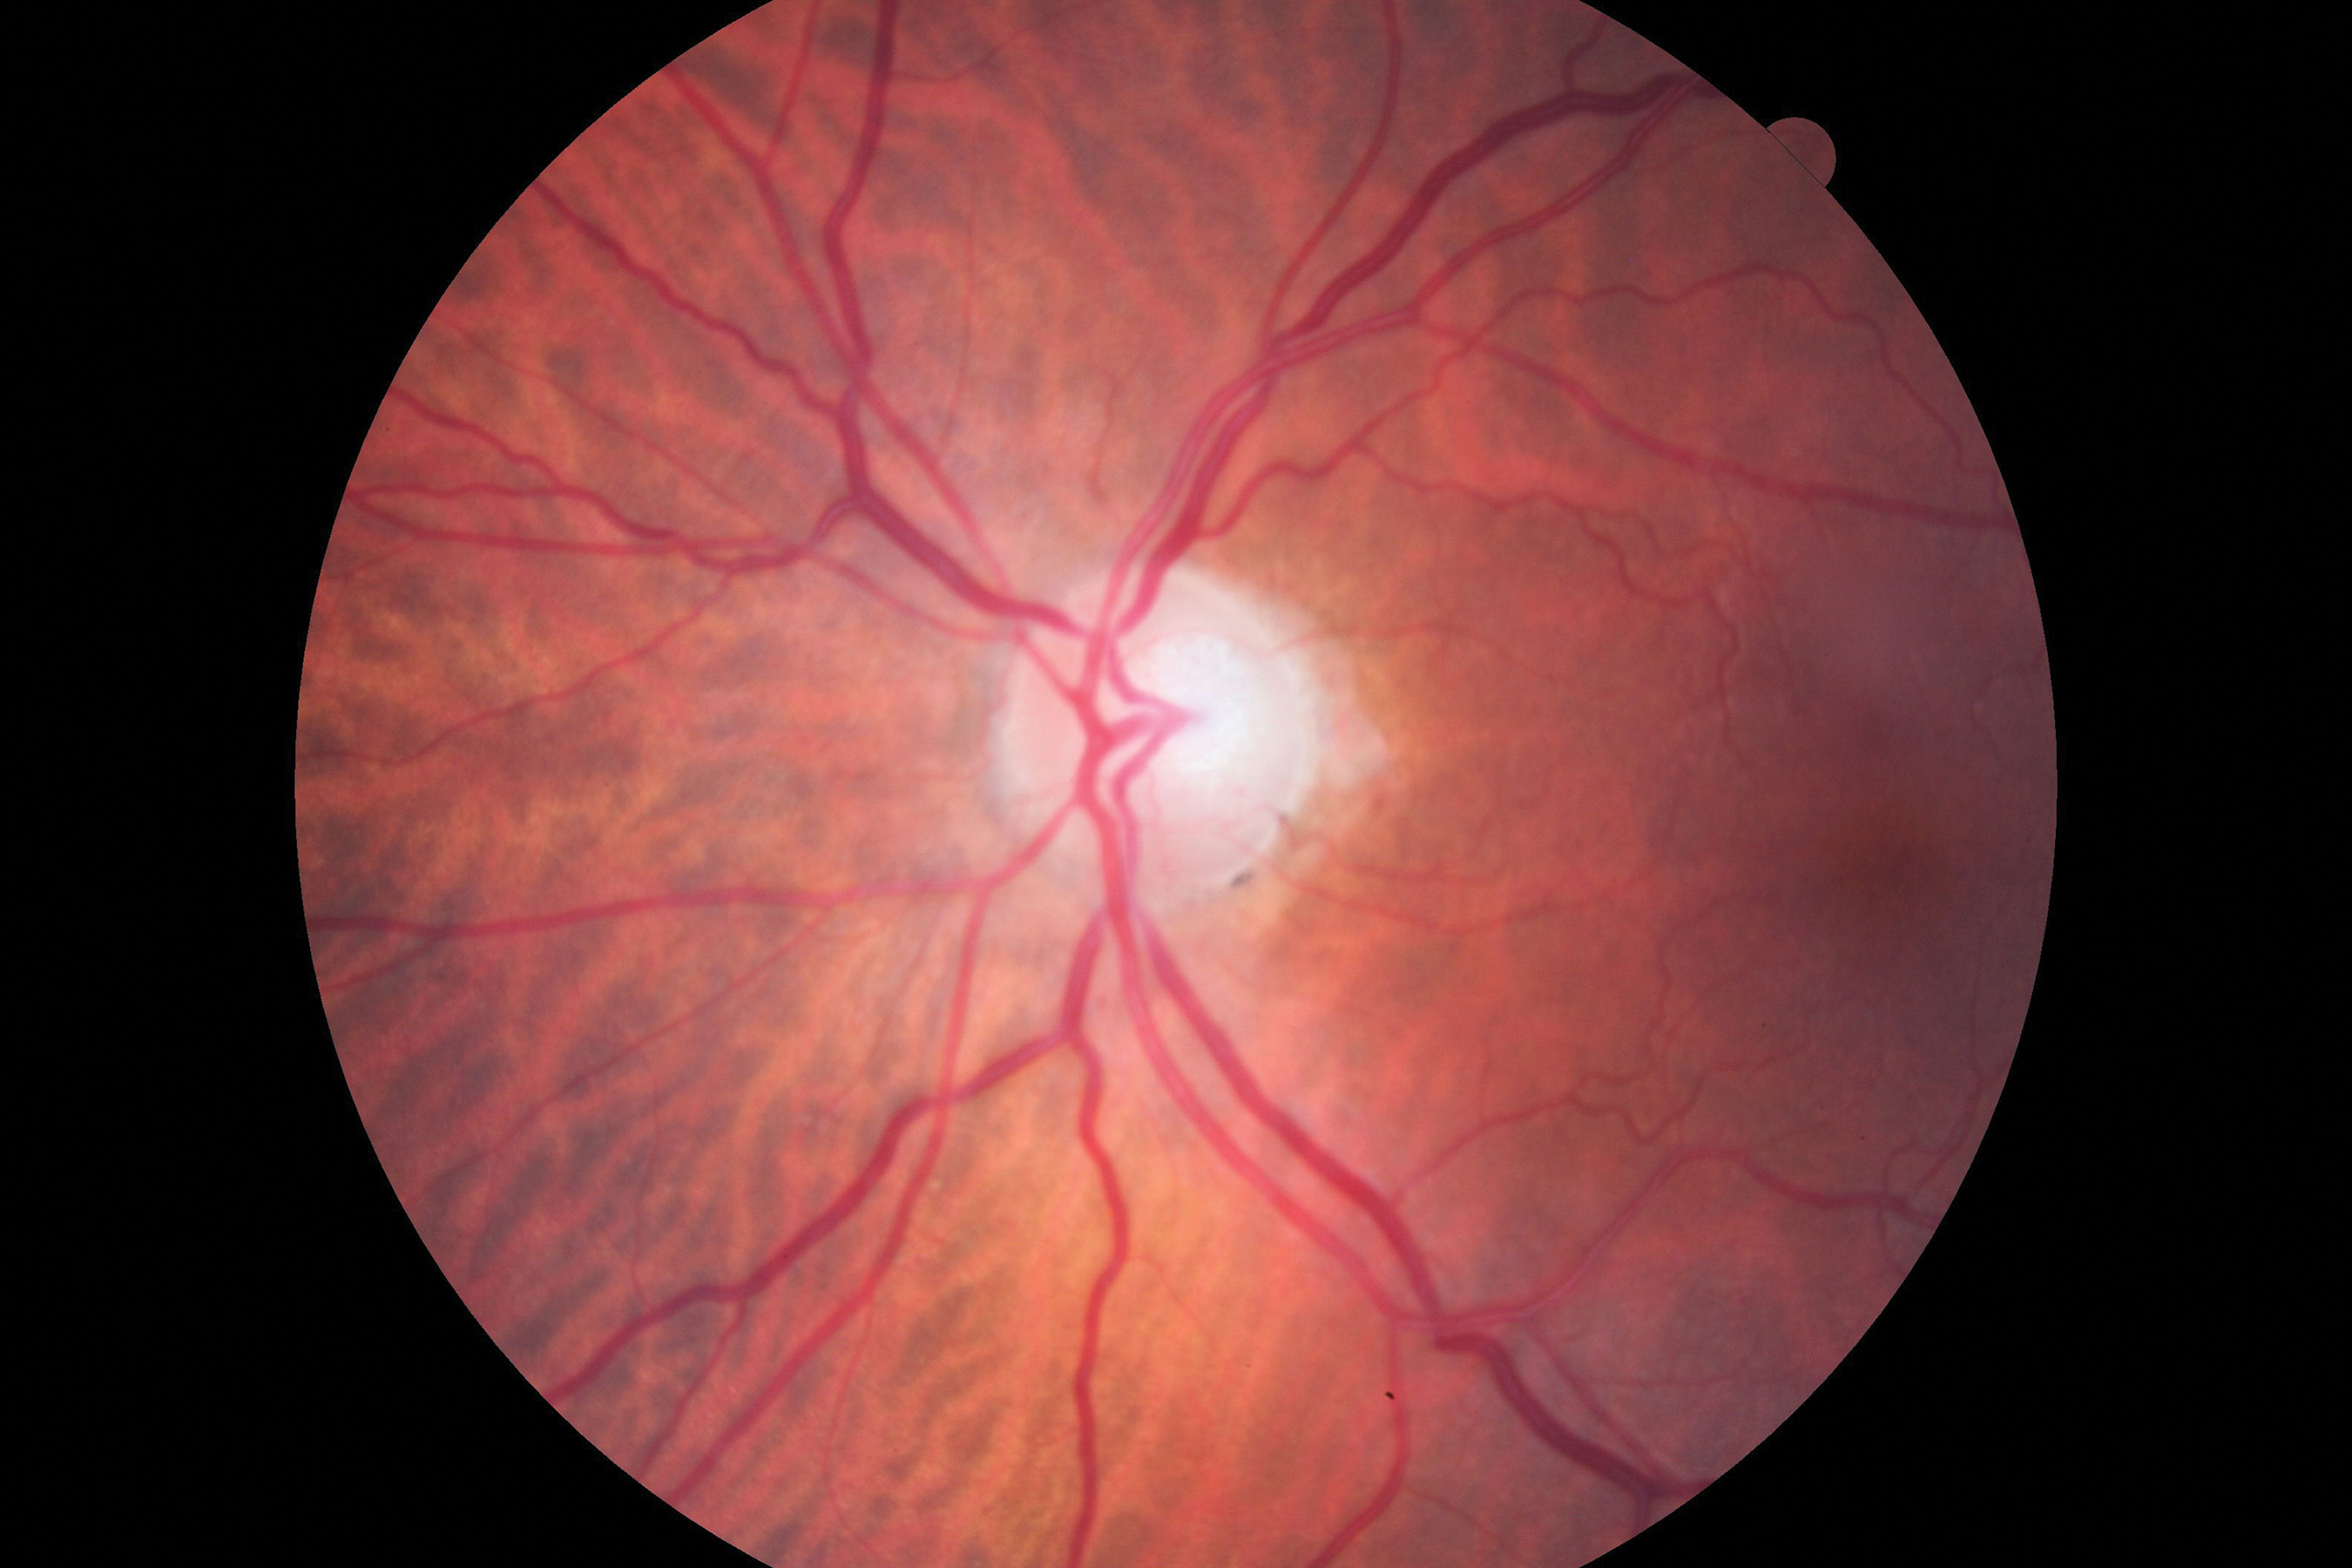 Fig. 1. Visible in this patient’s optic disc is a temporal pallor with numerous arterial constrictions and a/v nicking.